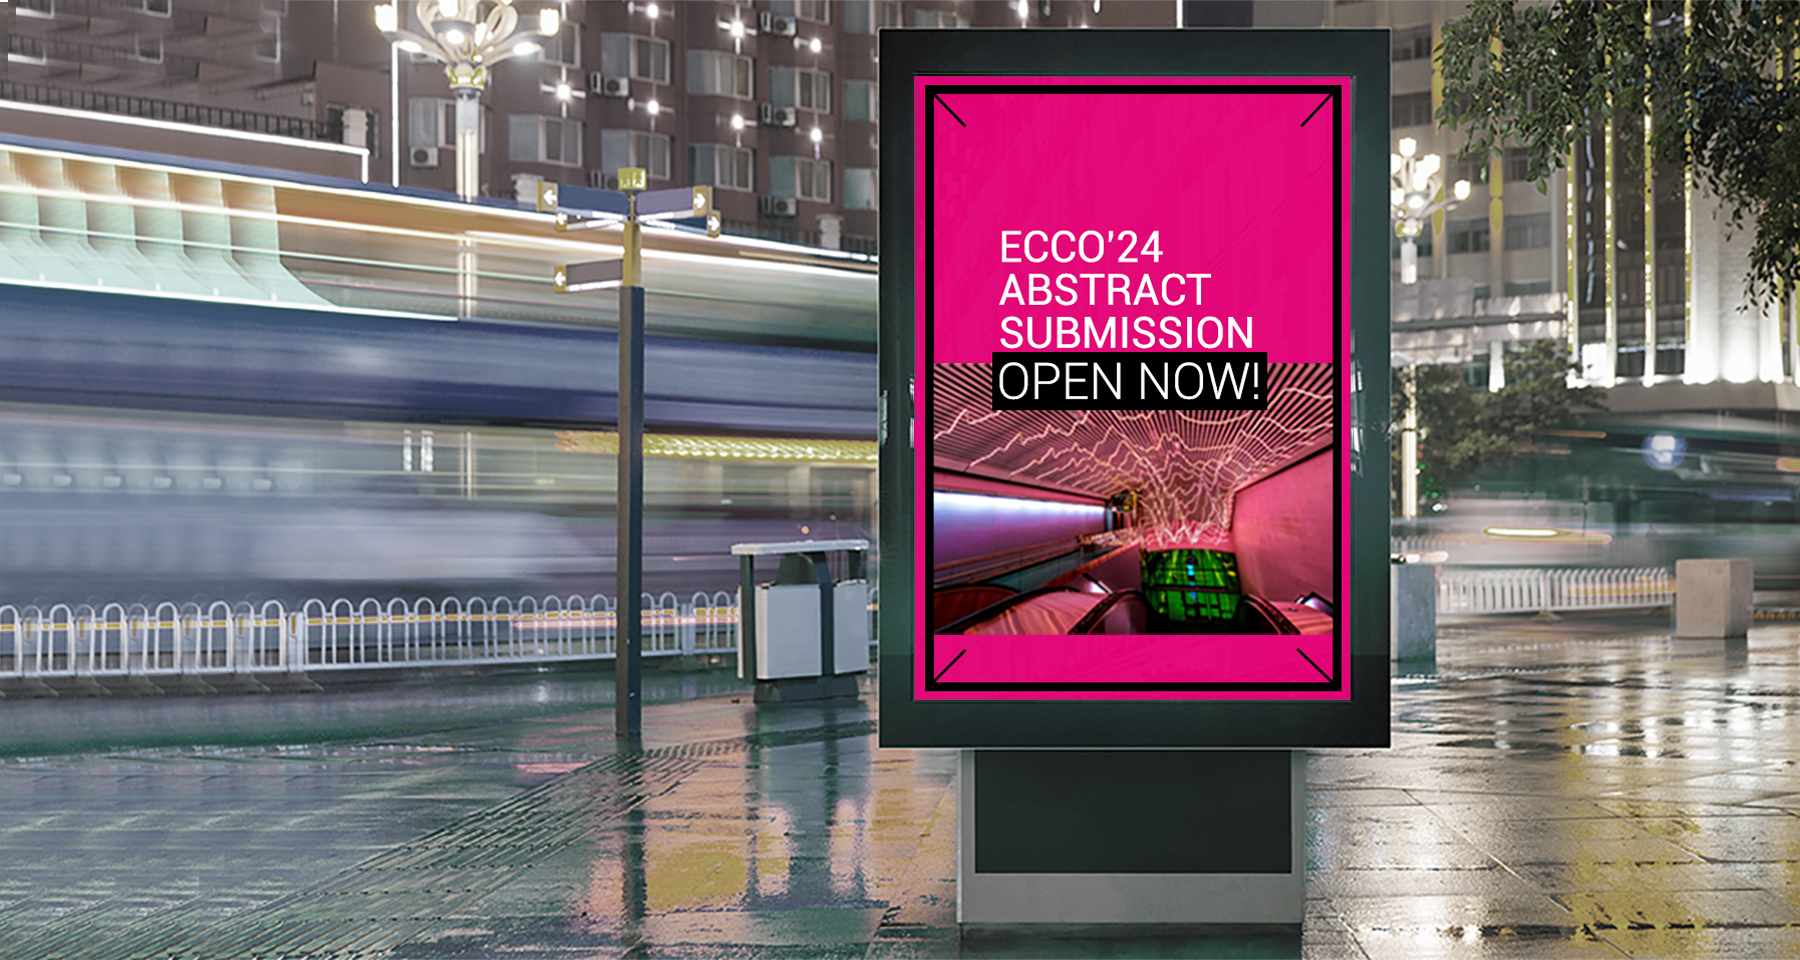 Abstracts submission now open for ECCO'24!